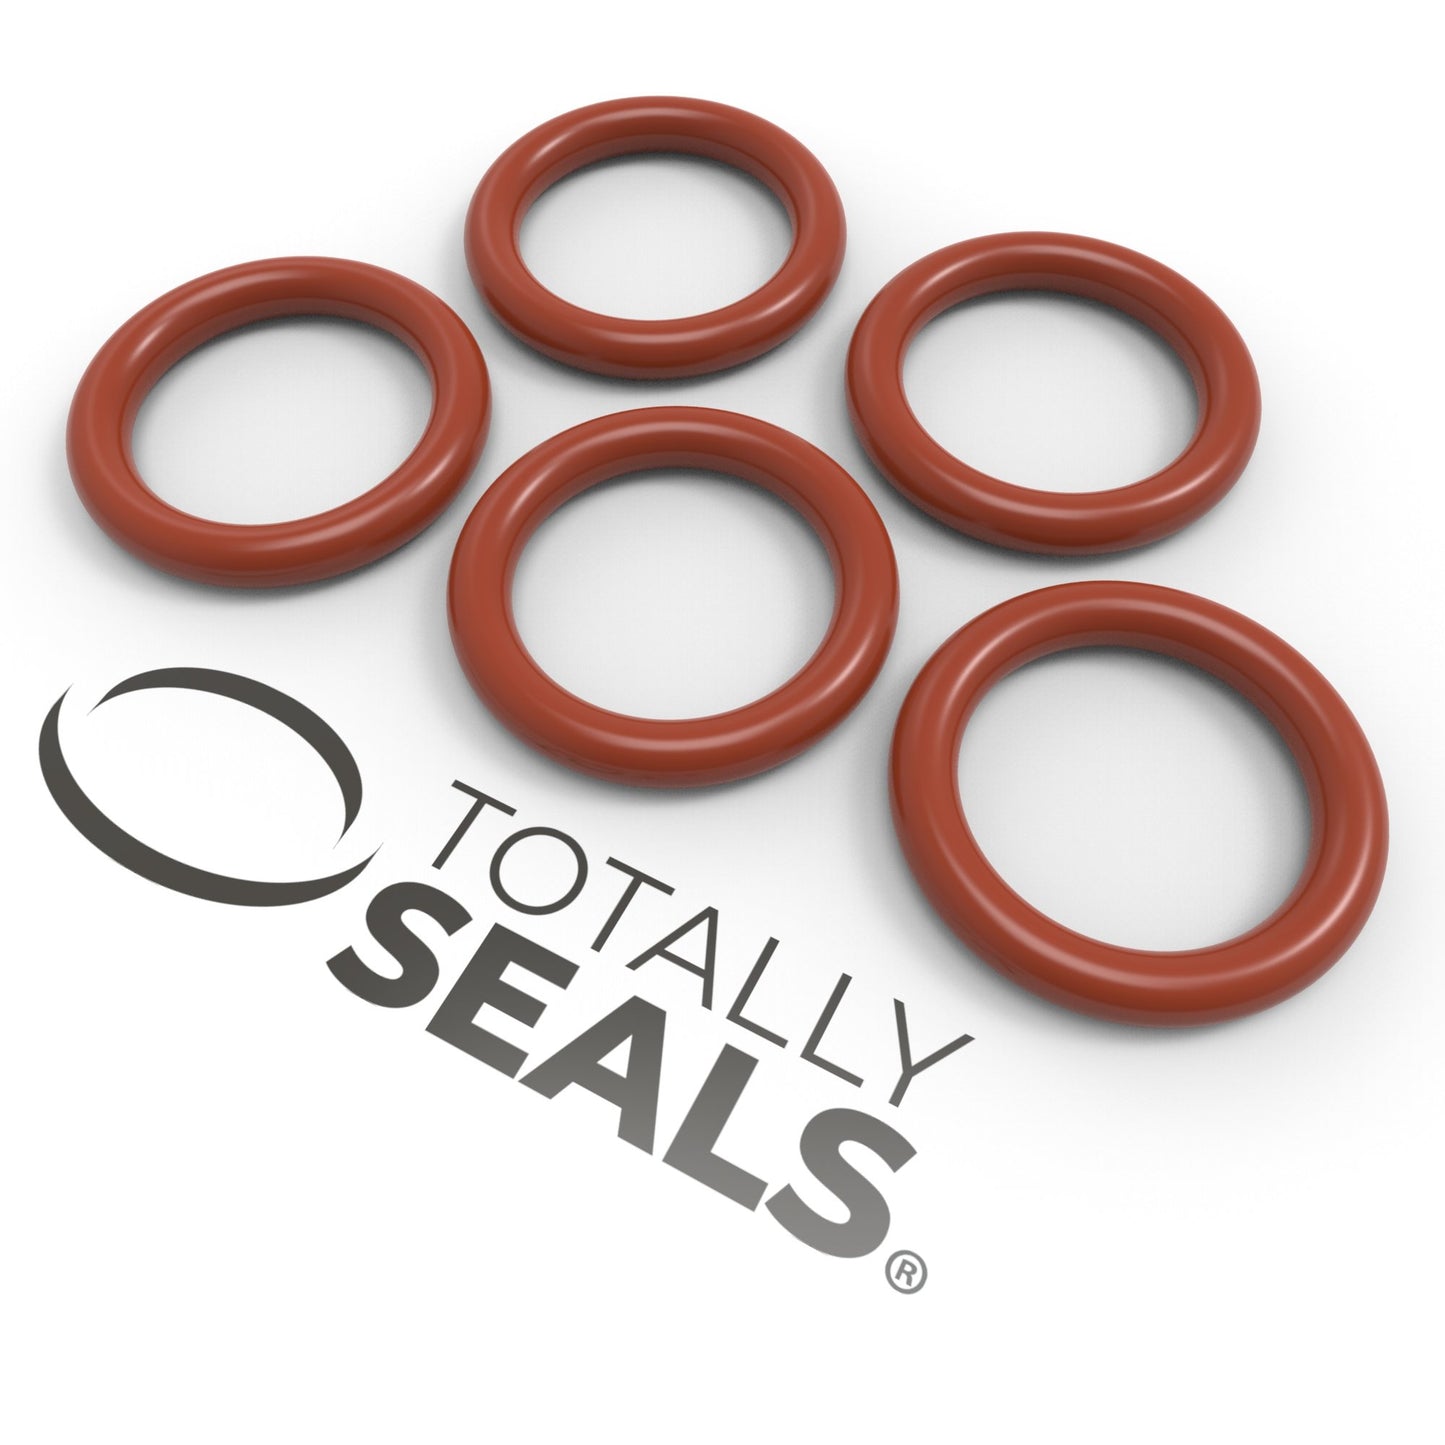 15mm x 2mm (19mm OD) Silicone O-Rings - Totally Seals®